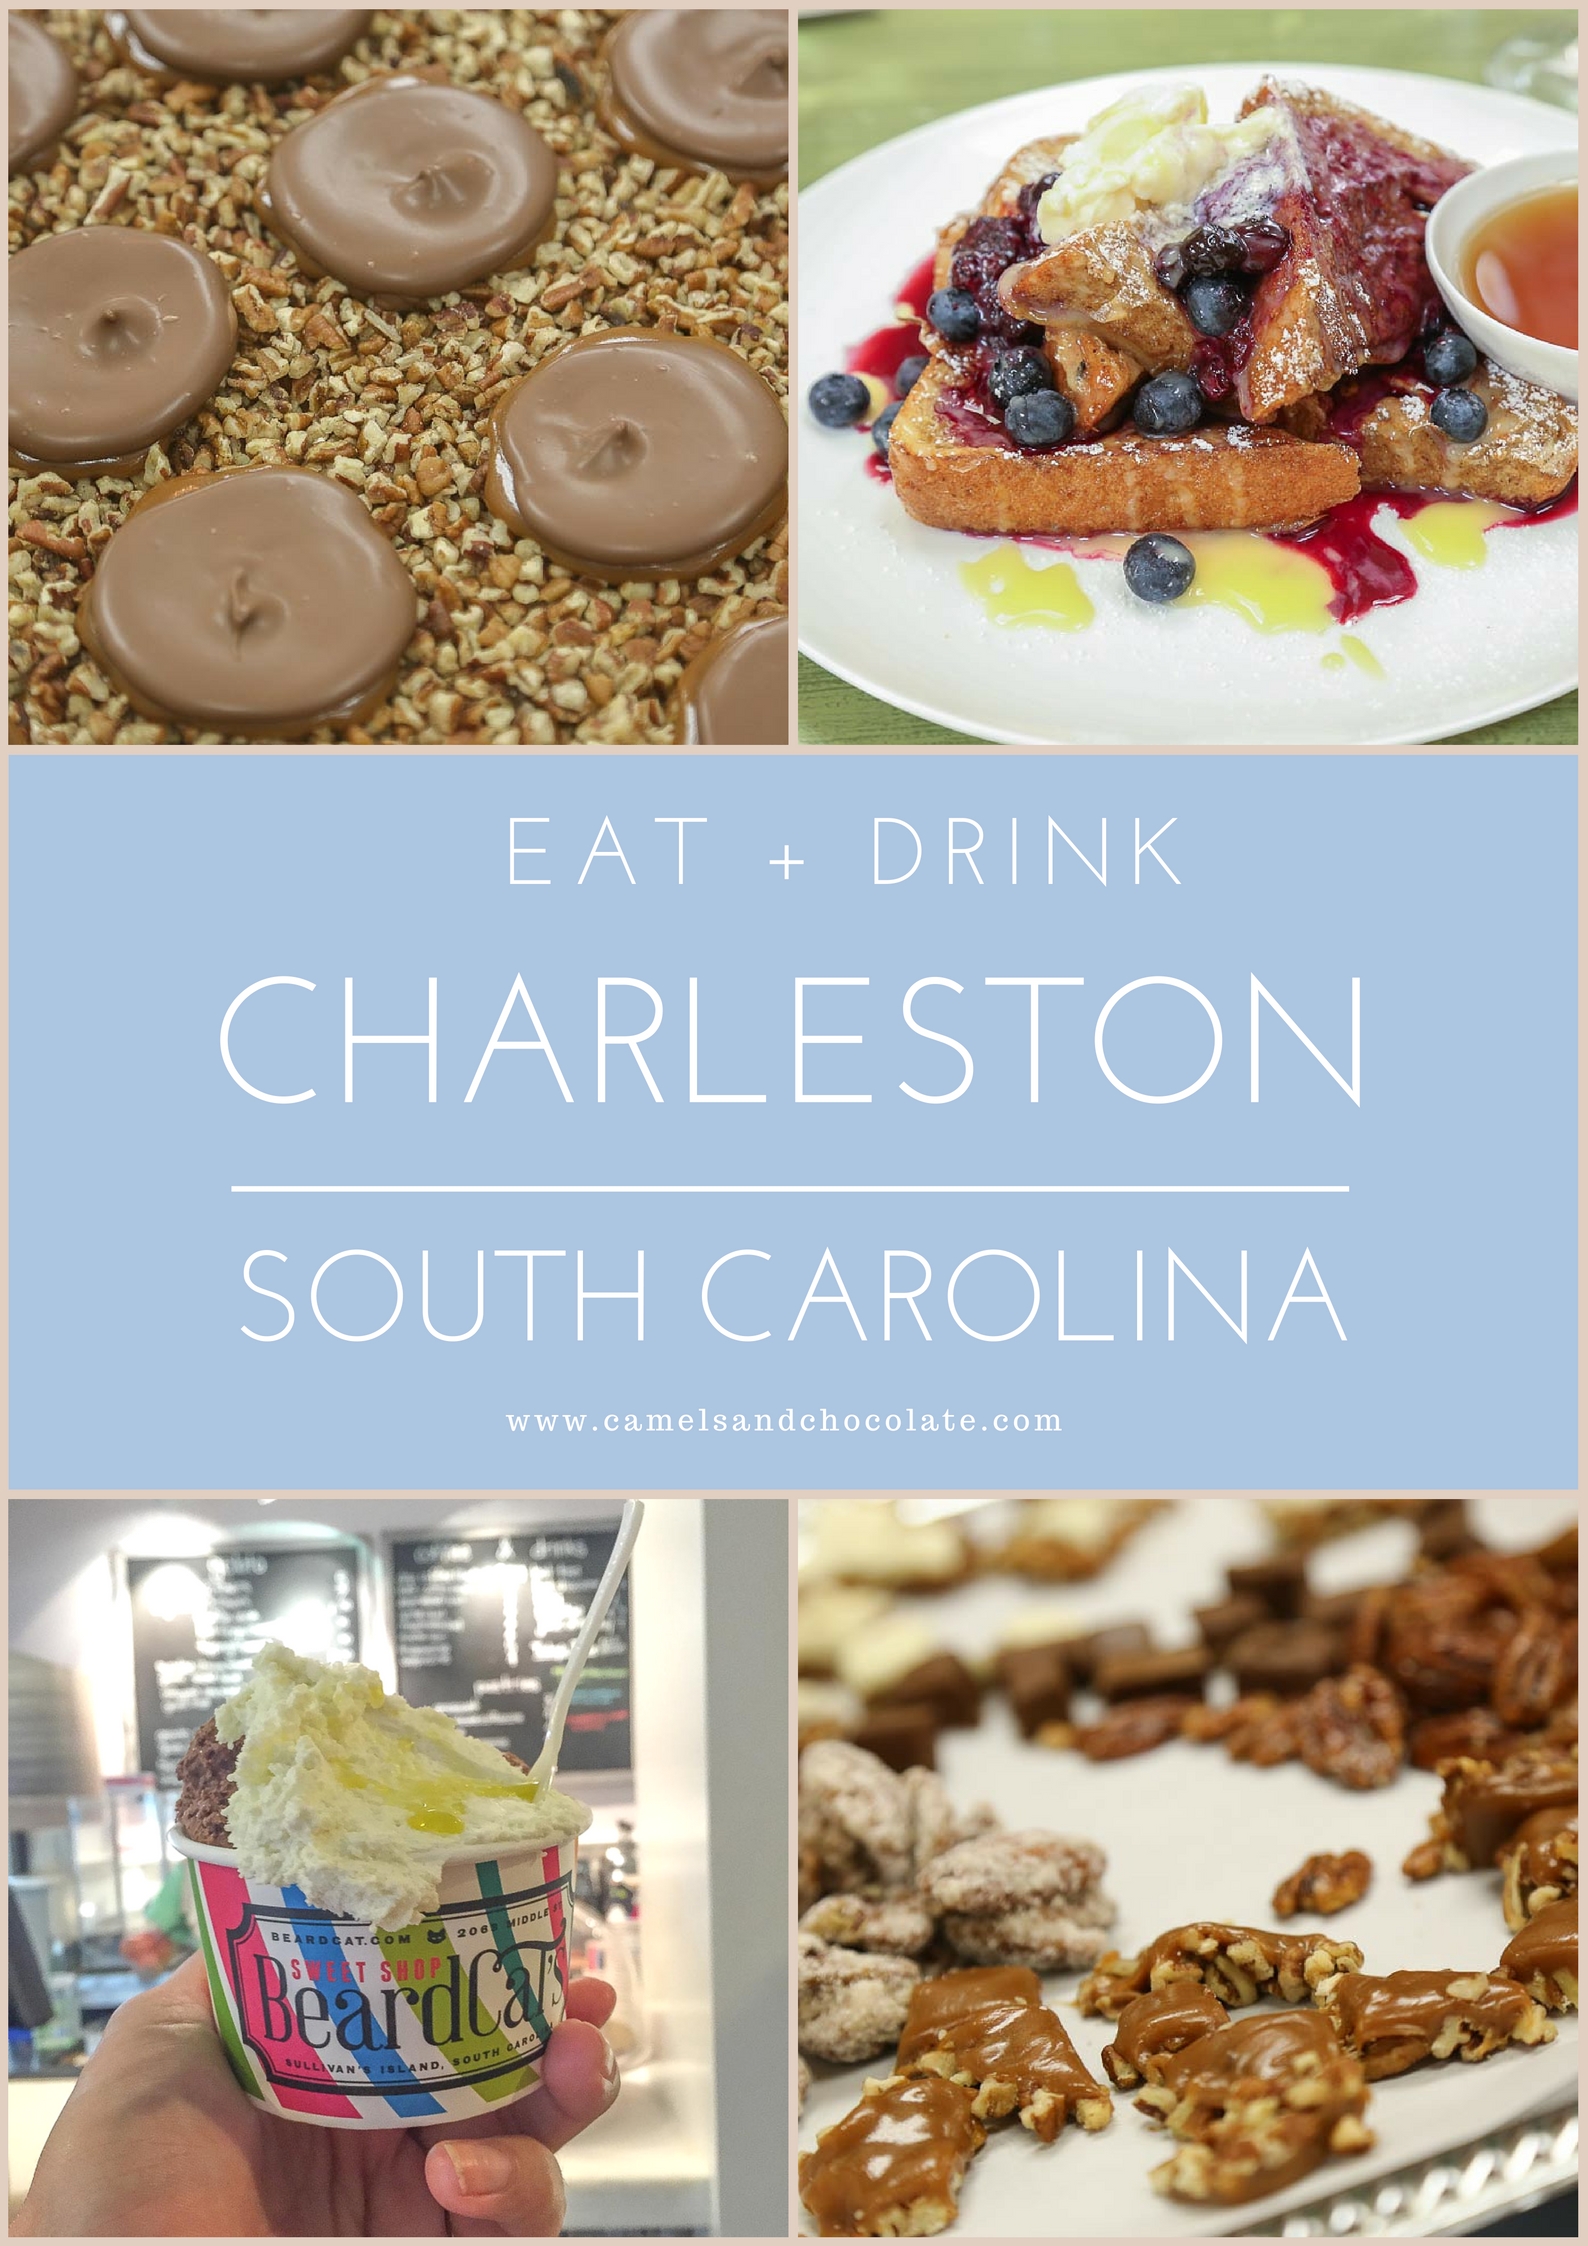 Where to Eat + Drink in Charleston